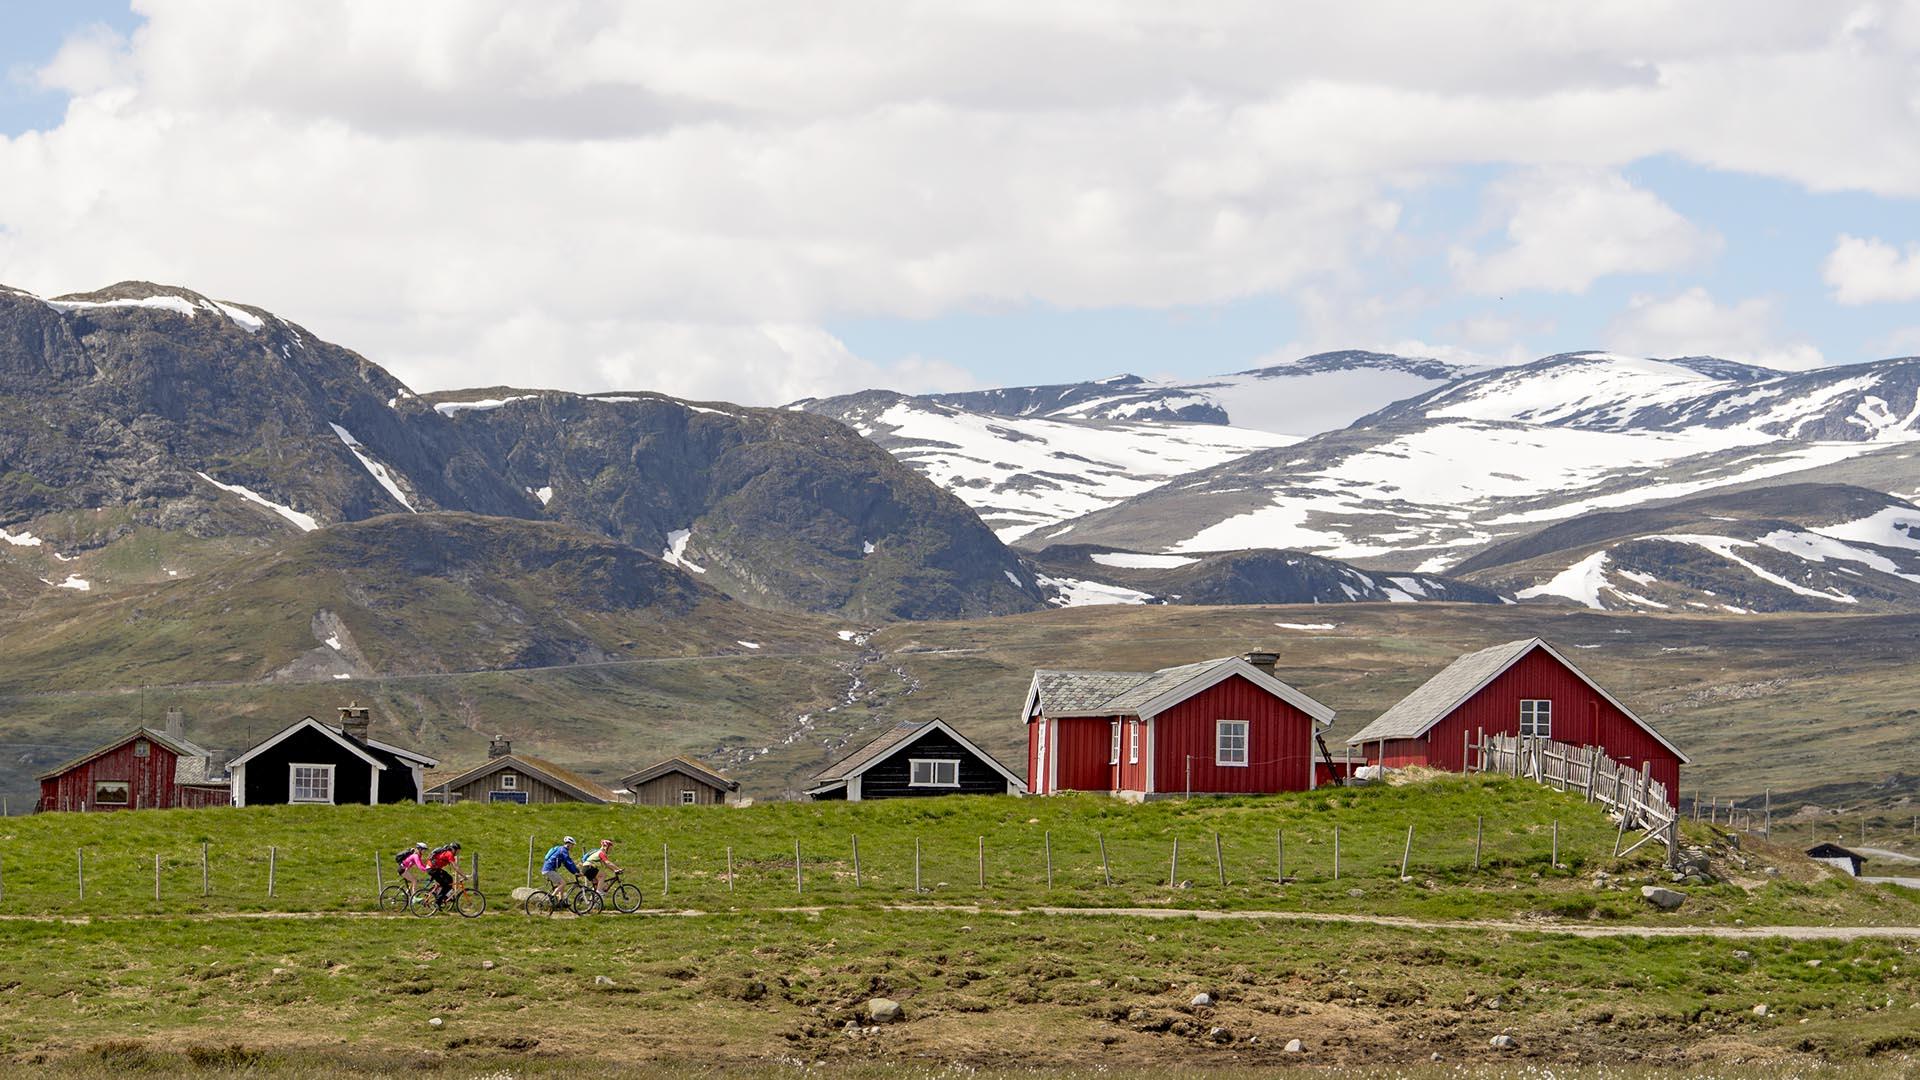 Cyclists on a farm road that runs through green pastures like a horizontal line across the photo. Behind are a number of red farm houses, and in the background a mighty mountain landscape with remaining snow.